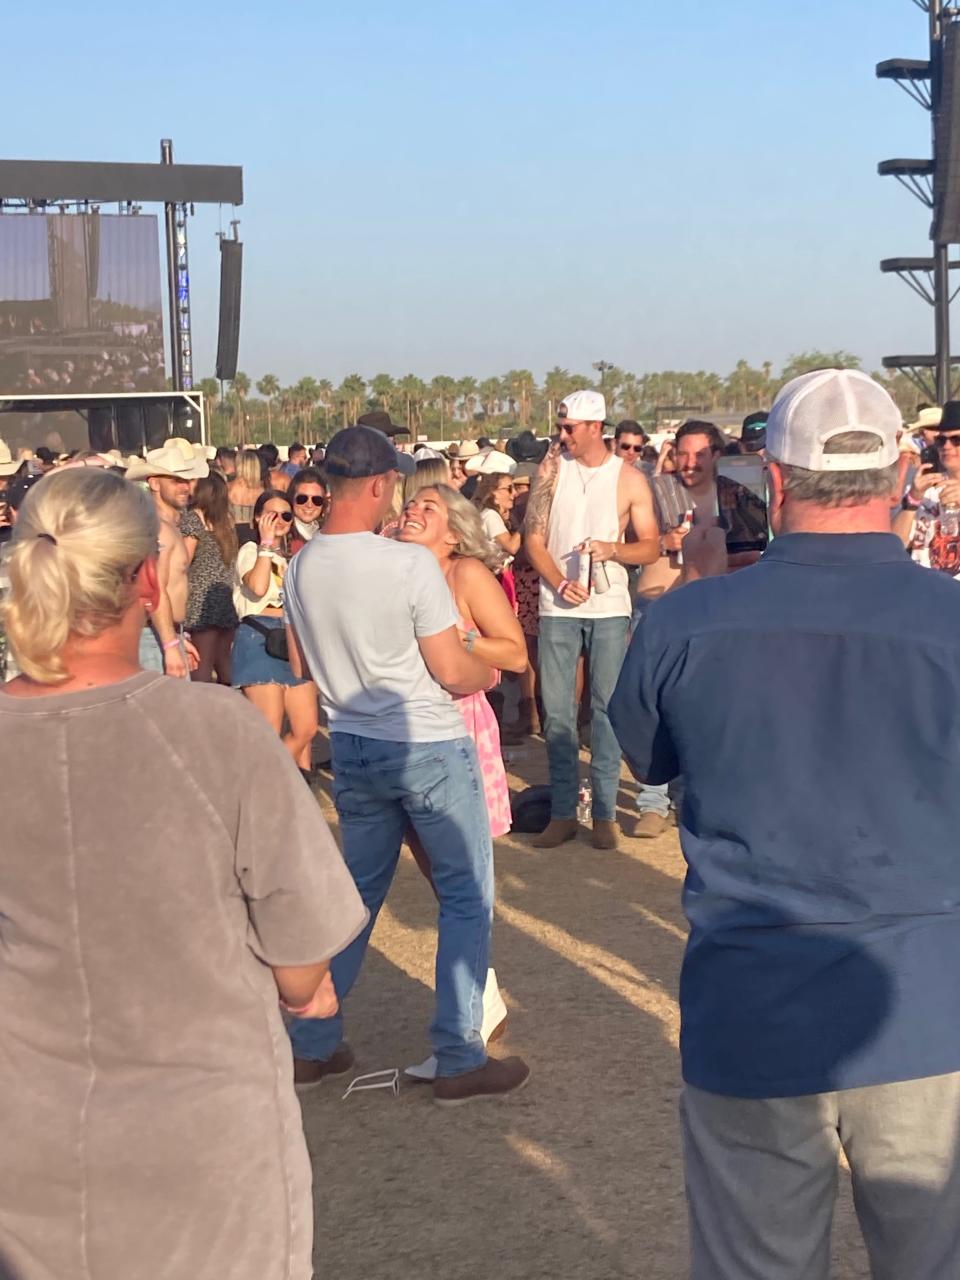 A festivalgoer proposes to his girfriend during Jordan Davis' Mane Stage set at Stagecoach country music festival in Indio, Calif., on Friday, April 29, 2022.